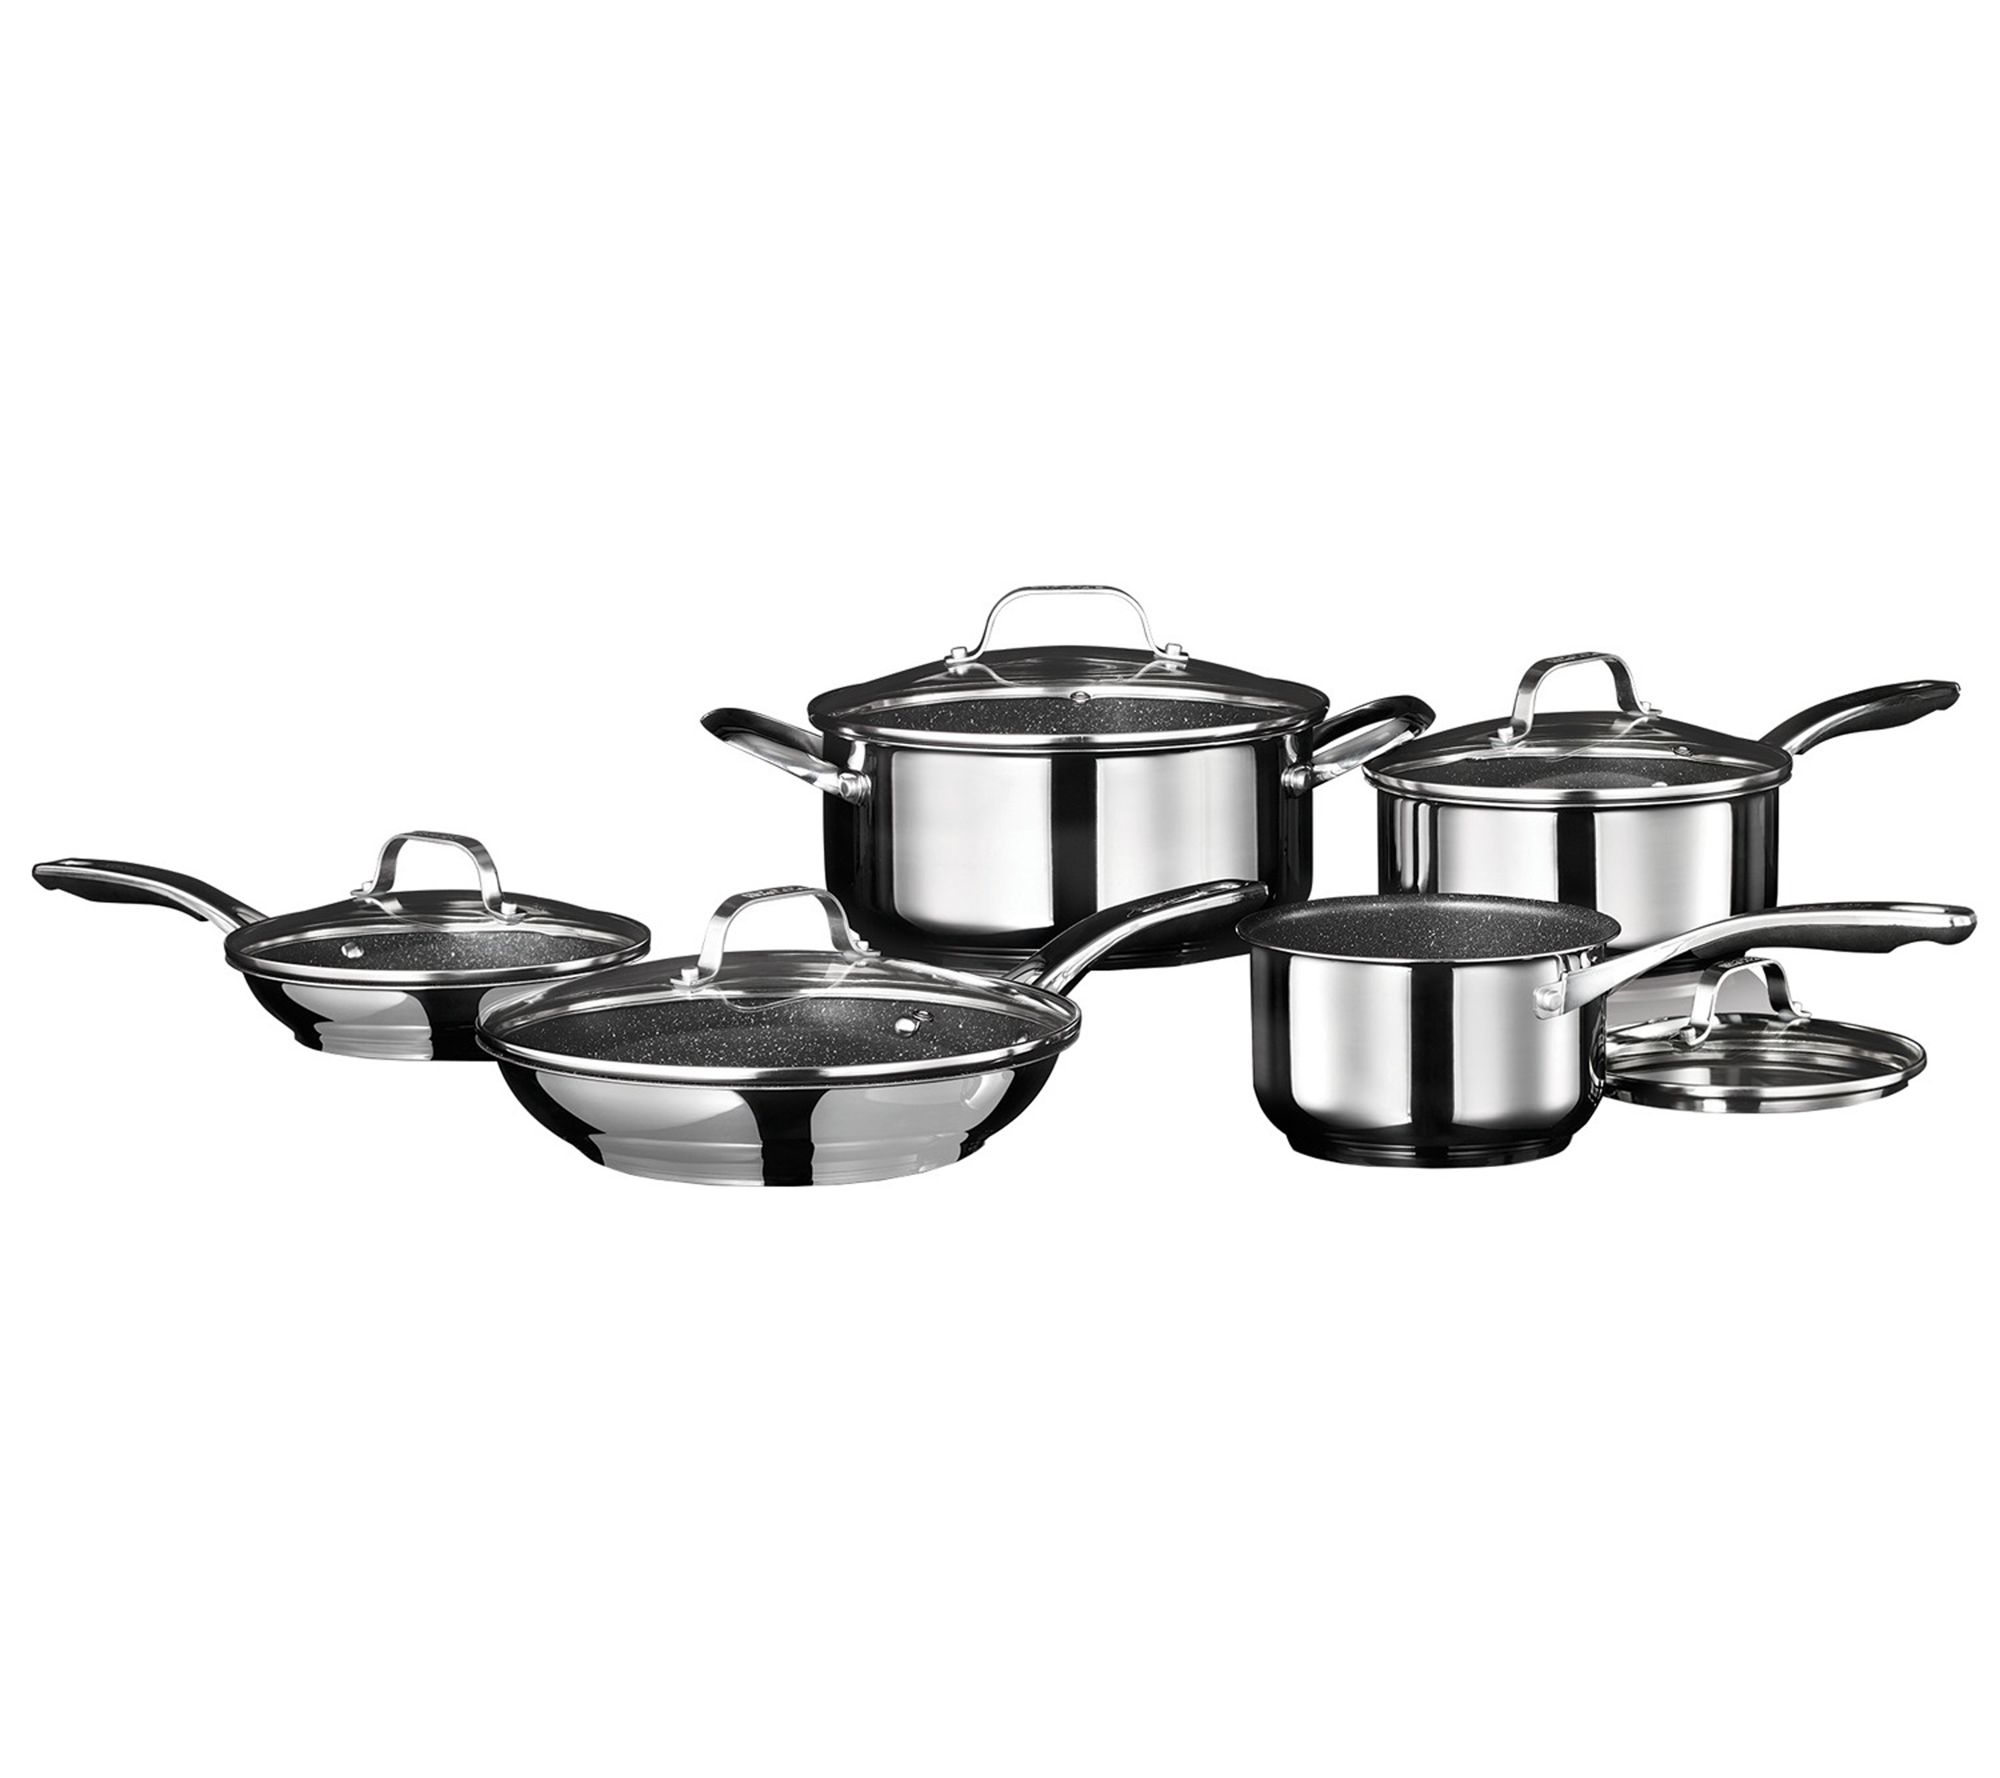 The Rock By Starfrit 16 piece Cookware Set, Dishwasher Safe Pots